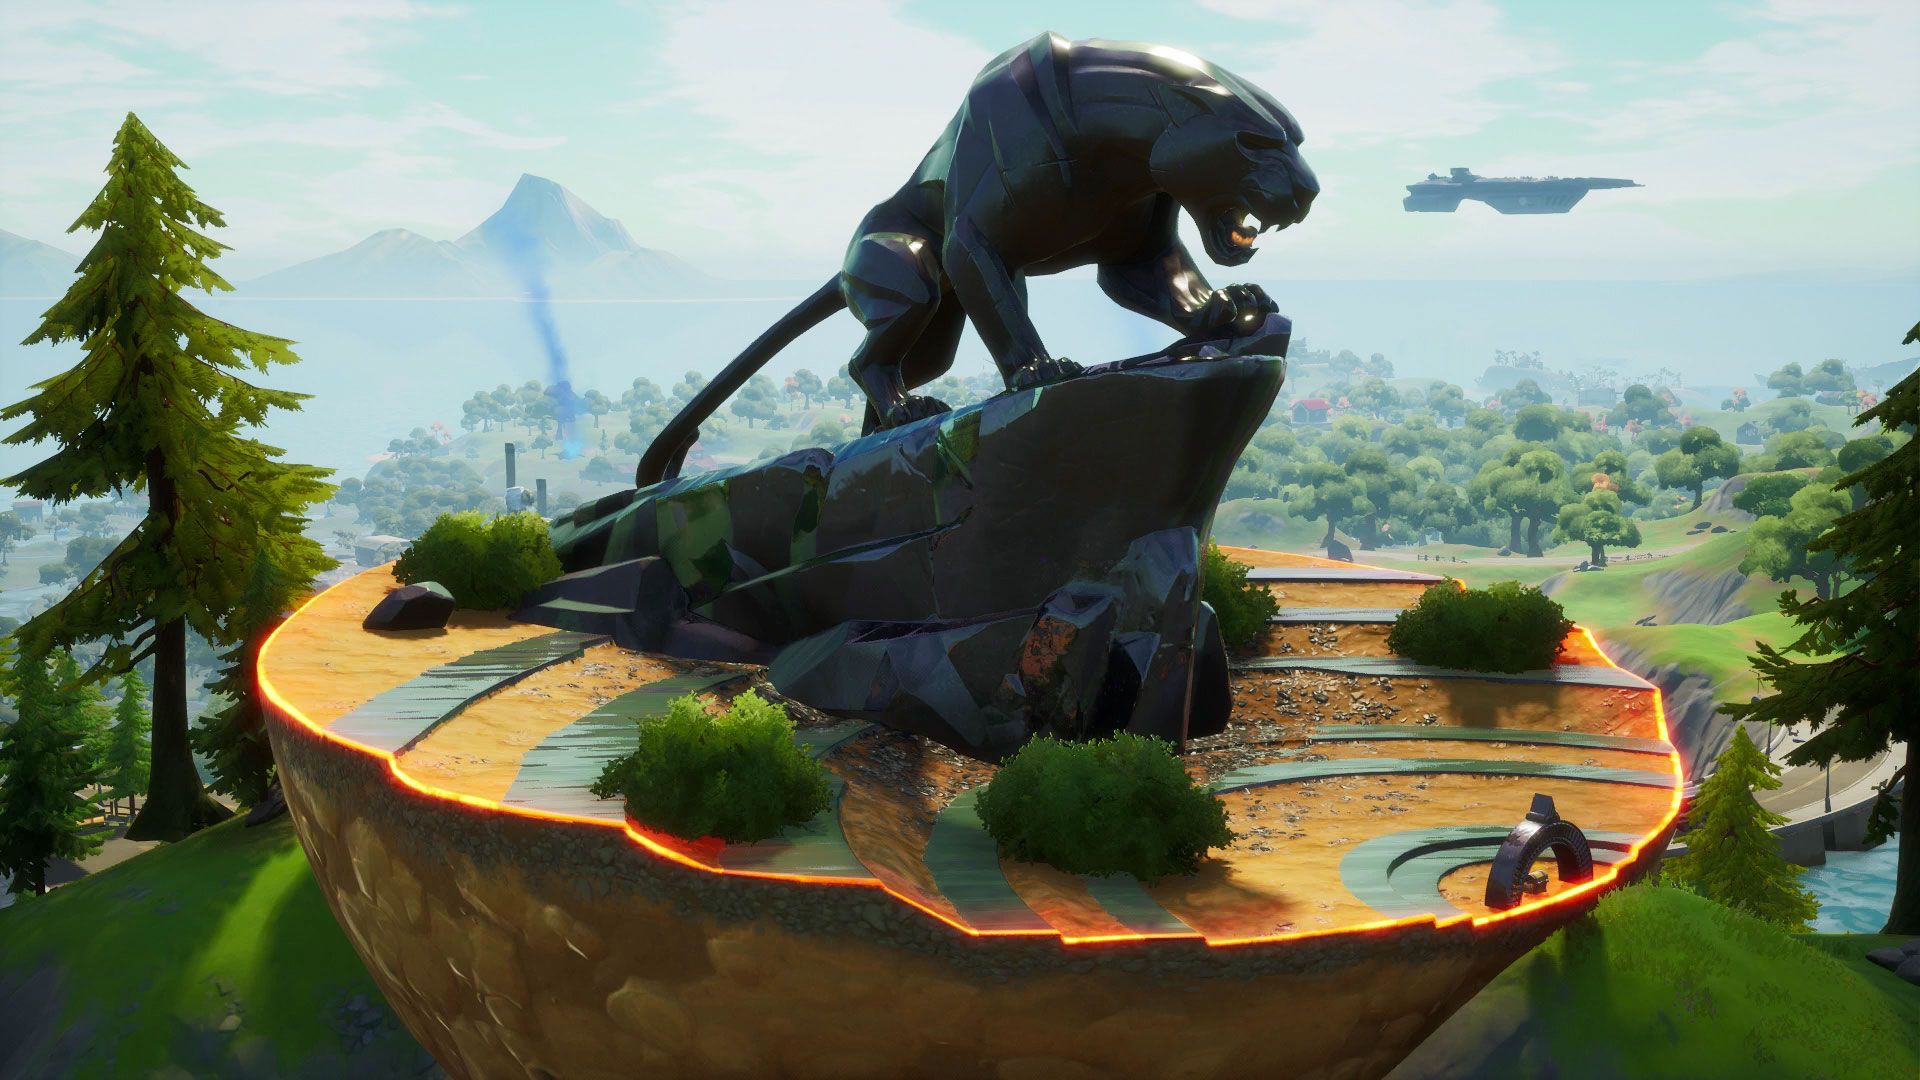 Fortnite Panther's Prowl location: Where to visit the Black Panther monument in Fortnite